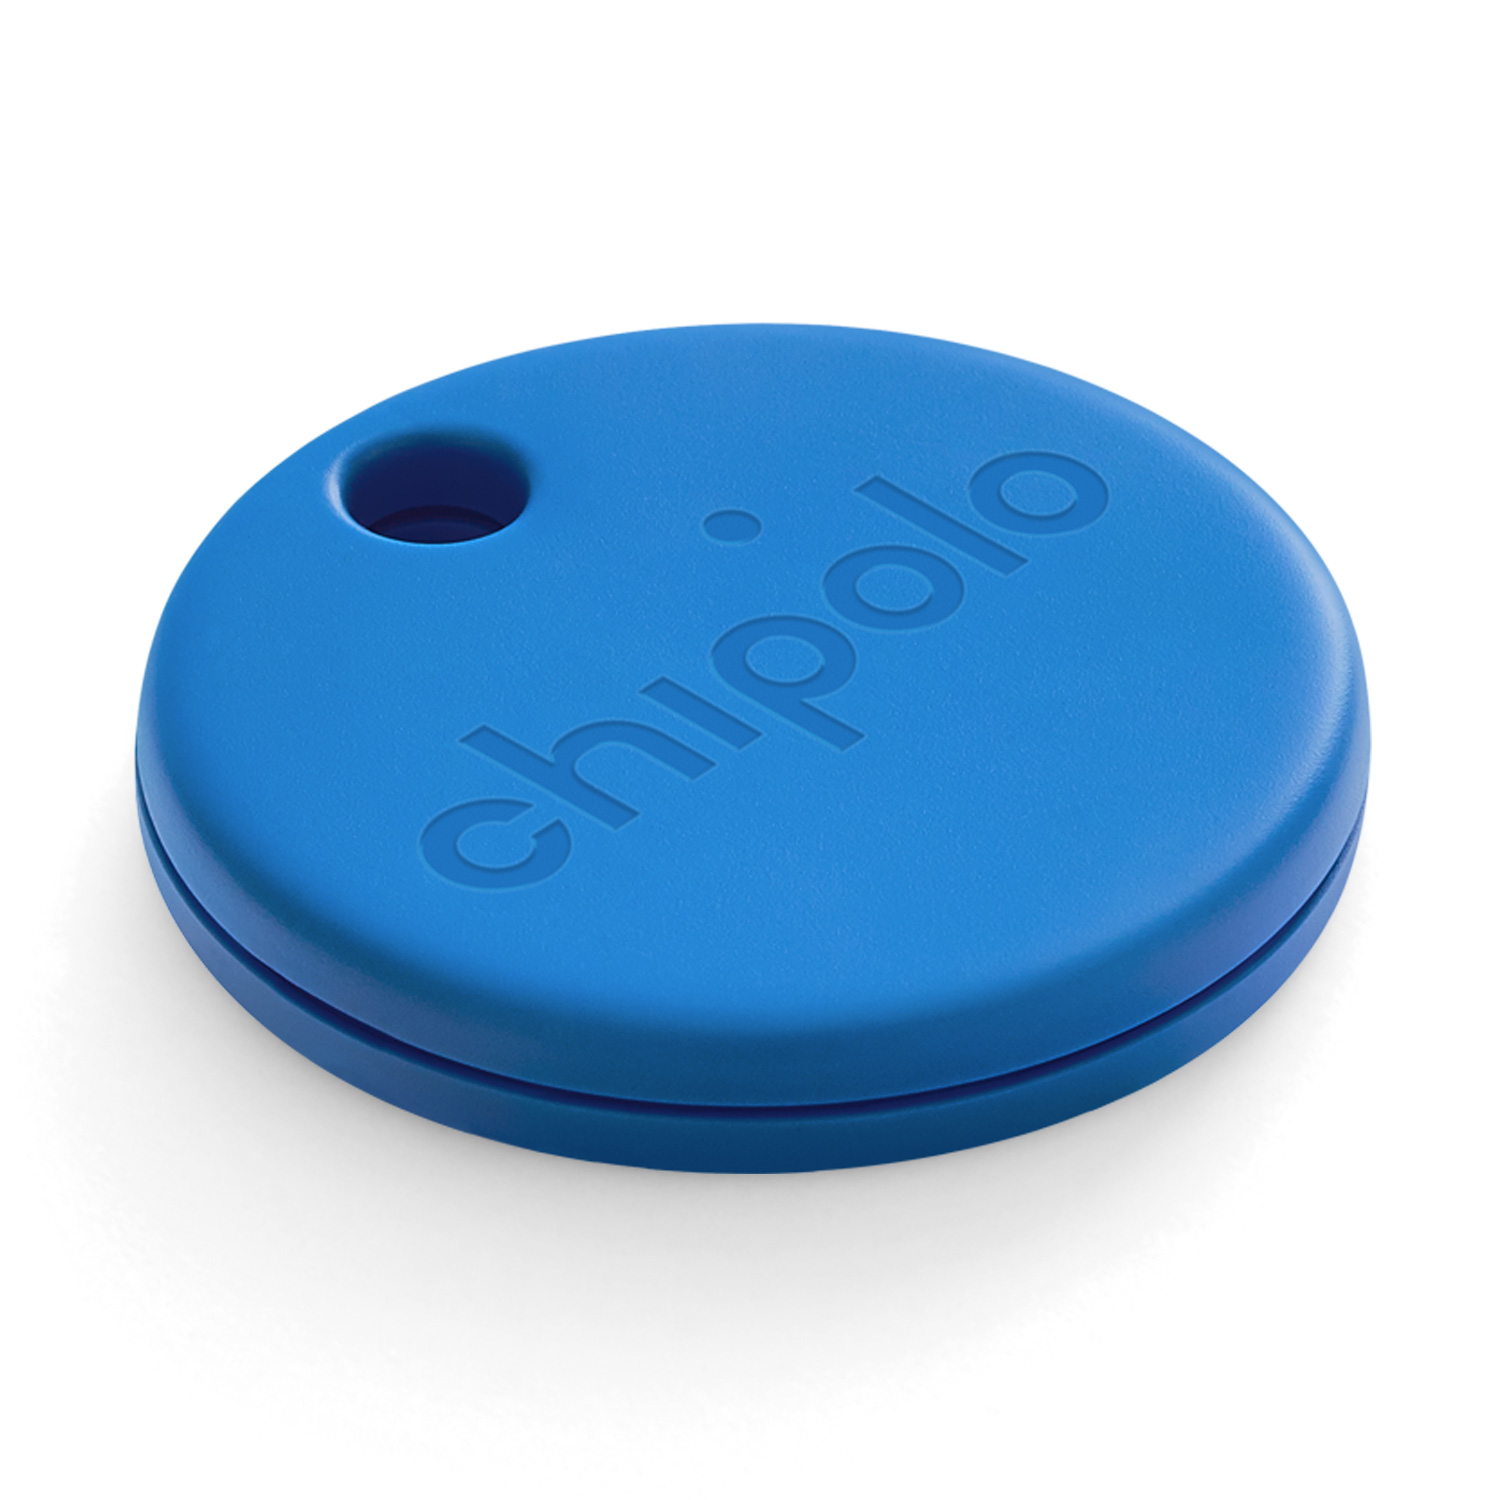 Chipolo ONE - Bluetooth tracker - blue